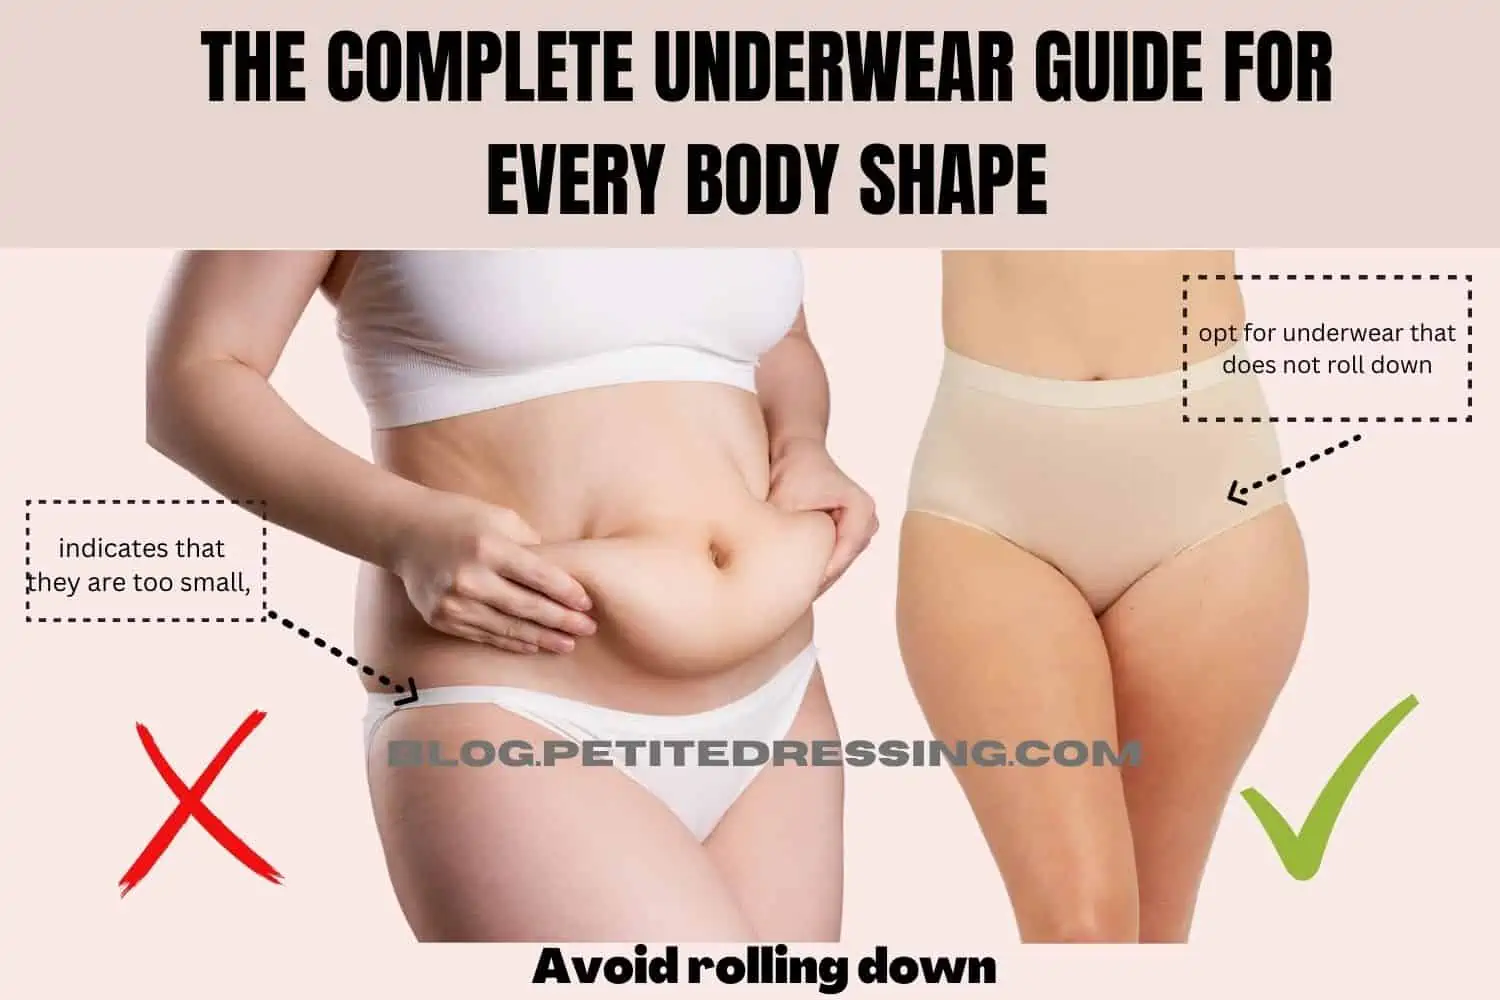 Trying this shaping underwear 😳 wait till the end! #bodyshaper #shape